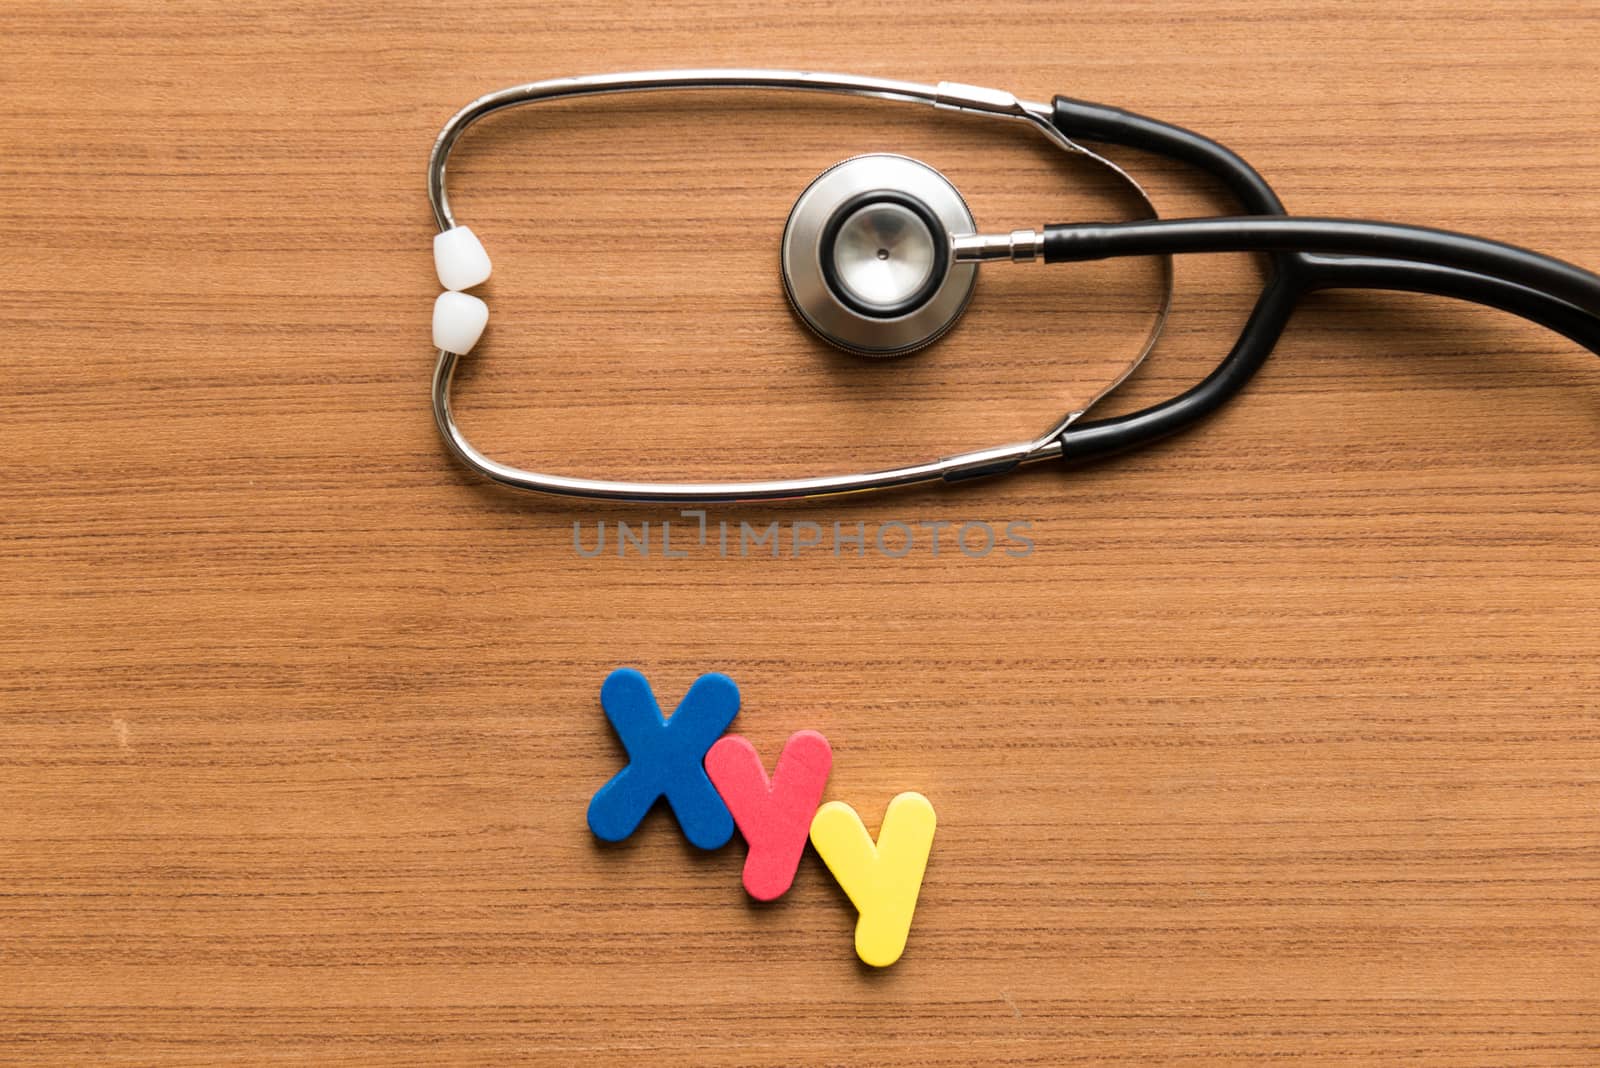 xyy colorful word with stethoscope by sohel.parvez@hotmail.com